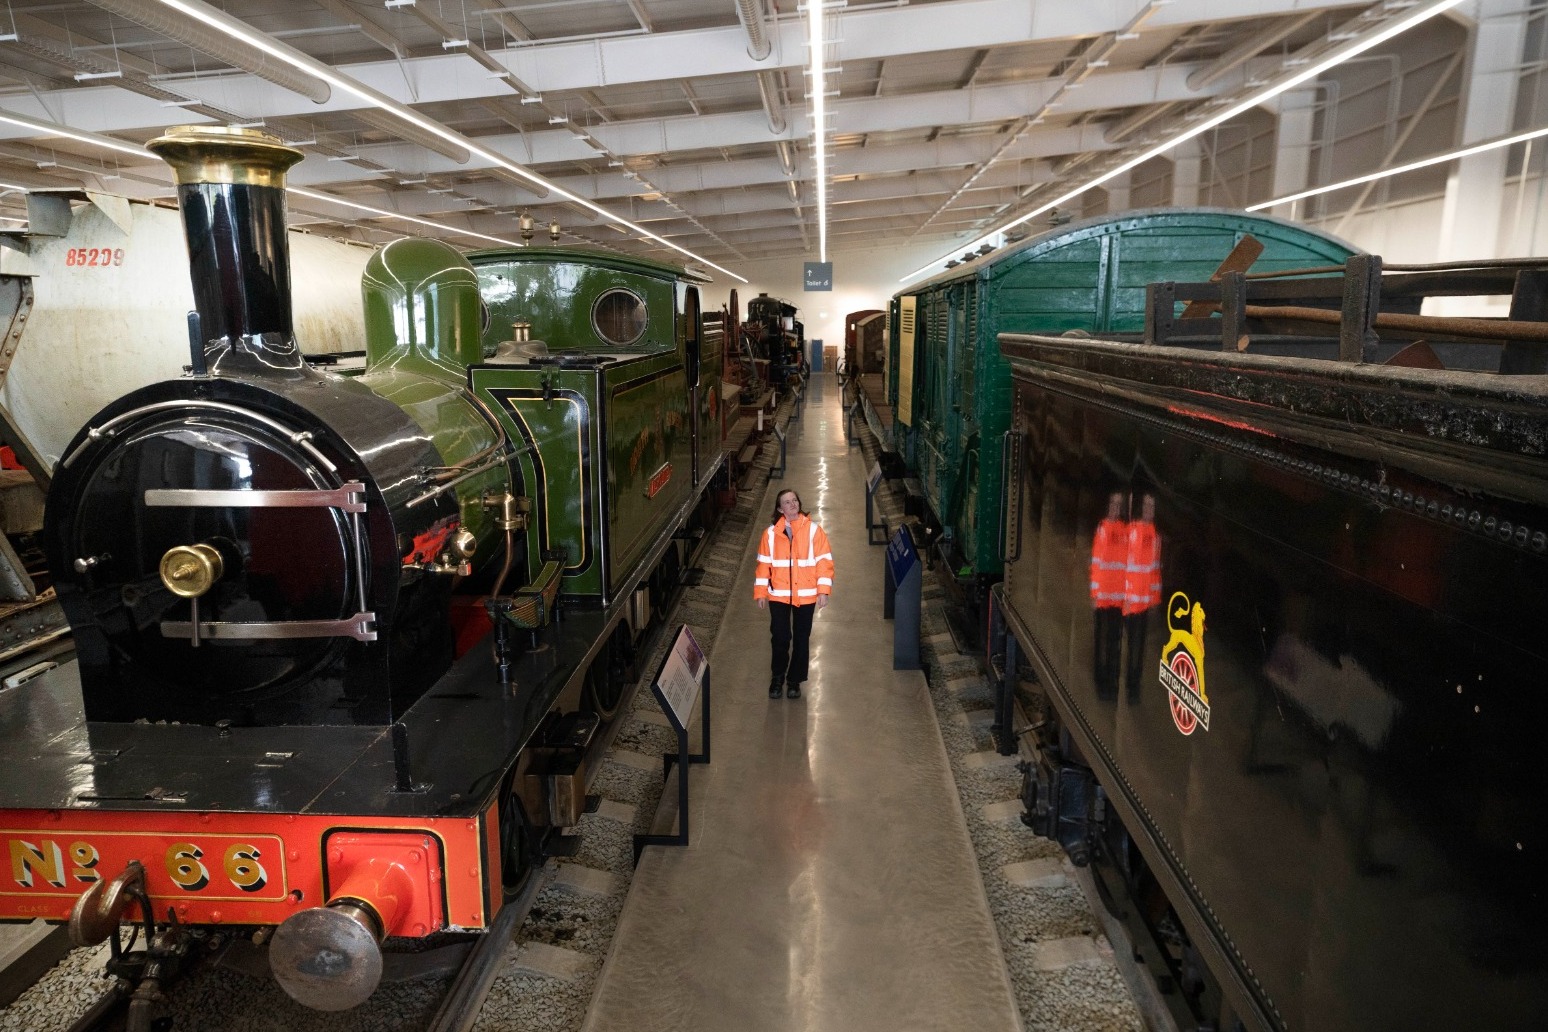 Rail vehicles assembled for ‘Europe’s biggest display’